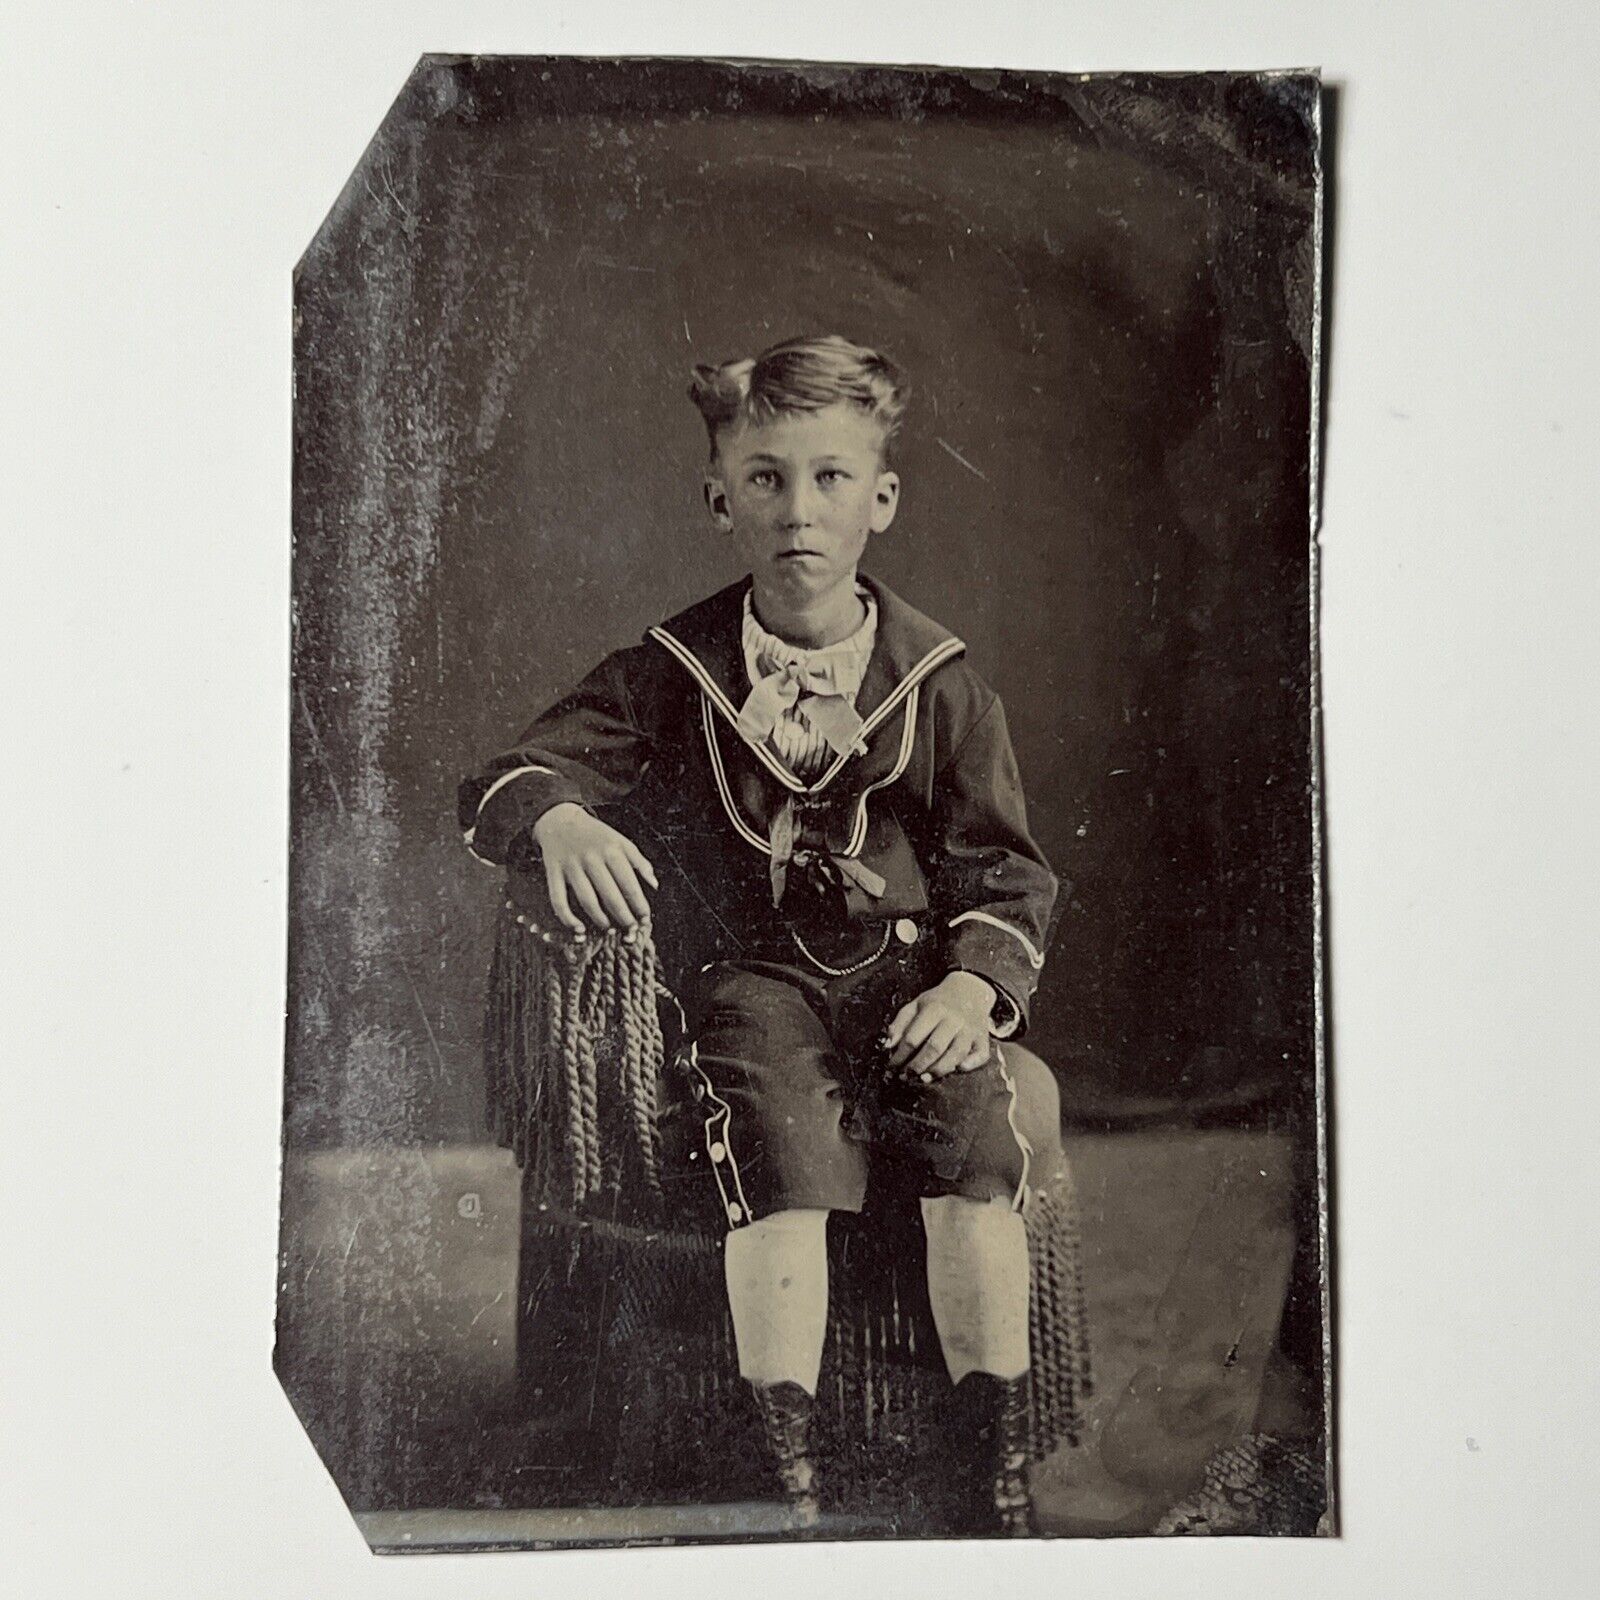 antique SAILOR SUIT KNICKERS and Stylish Hair Boy Tintype Photo Tin Type